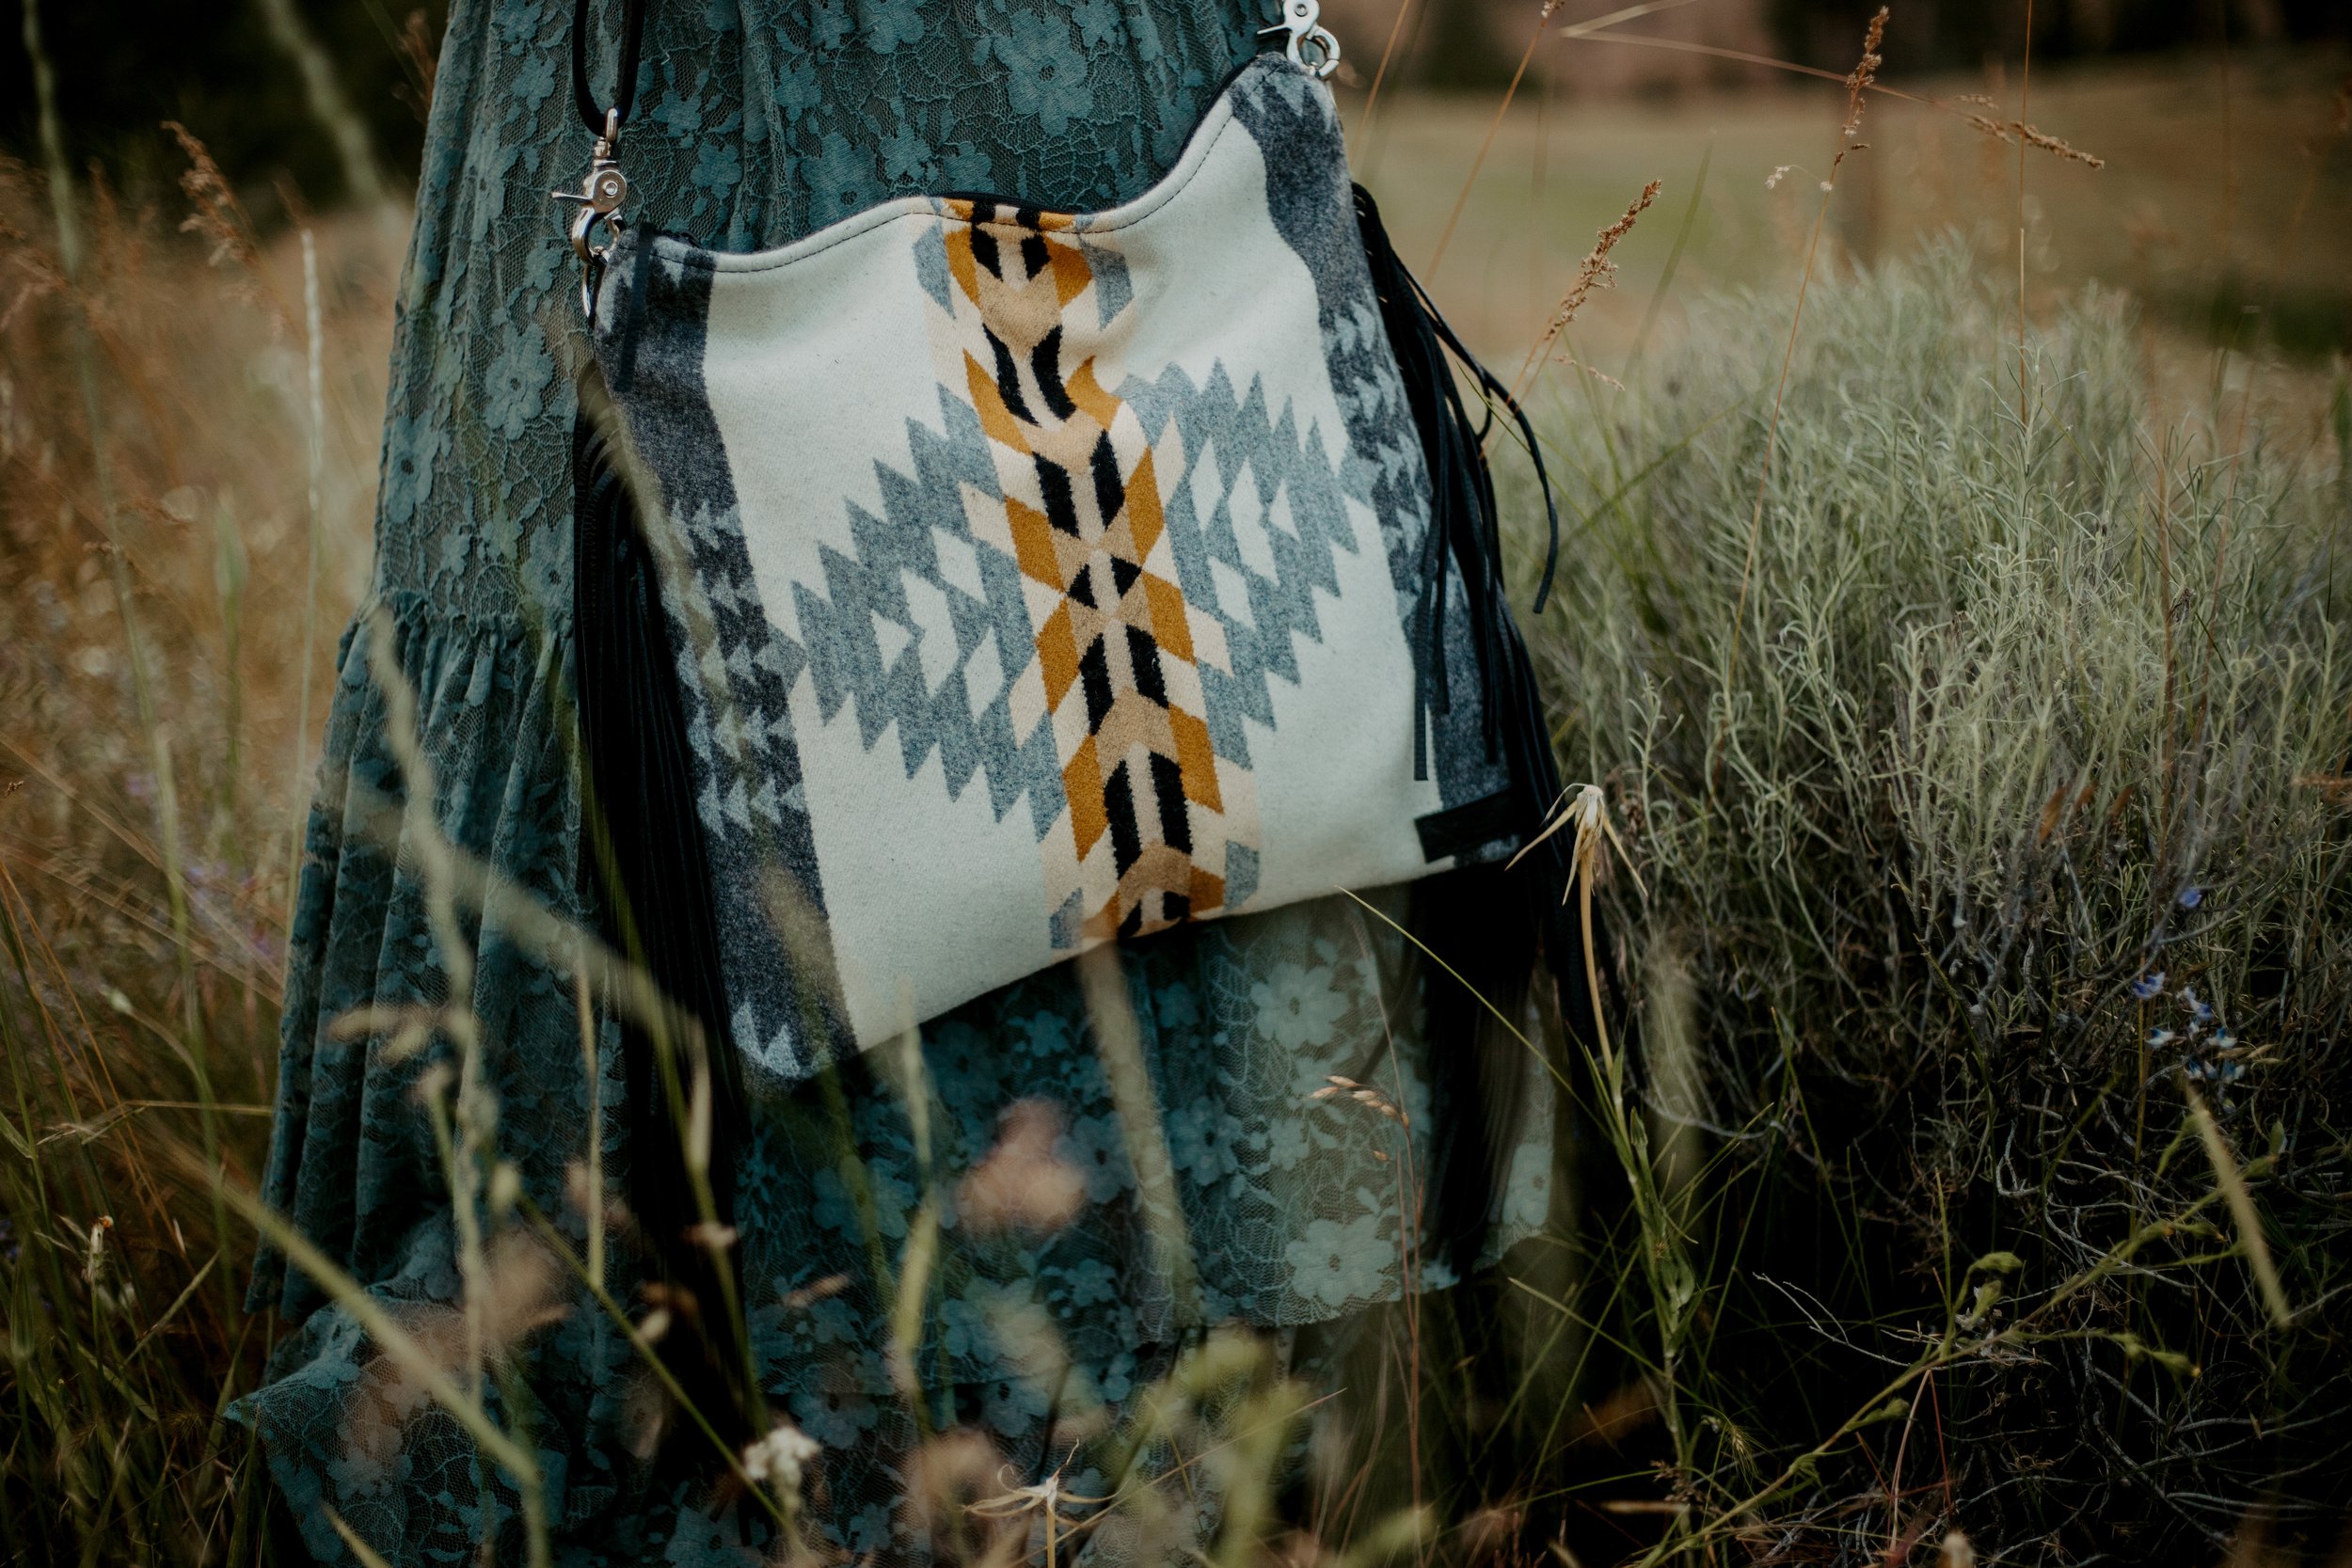 Buy Hand Crafted Leather Fringe Bohemian Cross Body Bag ~ Western Fringe Bag,  made to order from Resplendent Leather